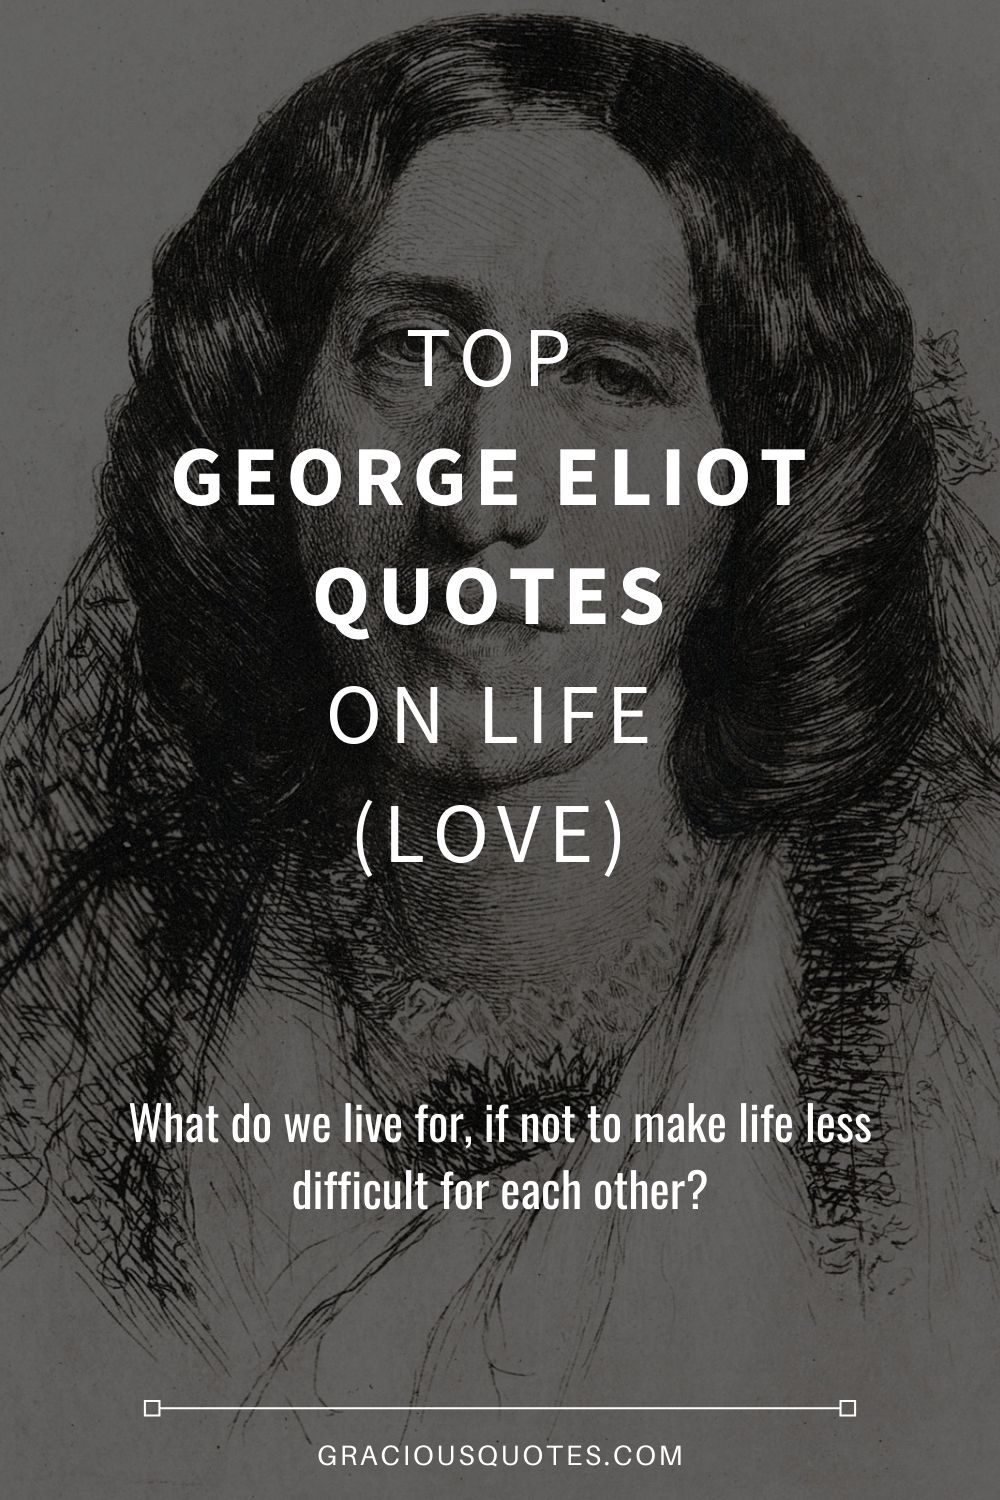 Top George Eliot Quotes on Life (LOVE) - Gracious Quotes